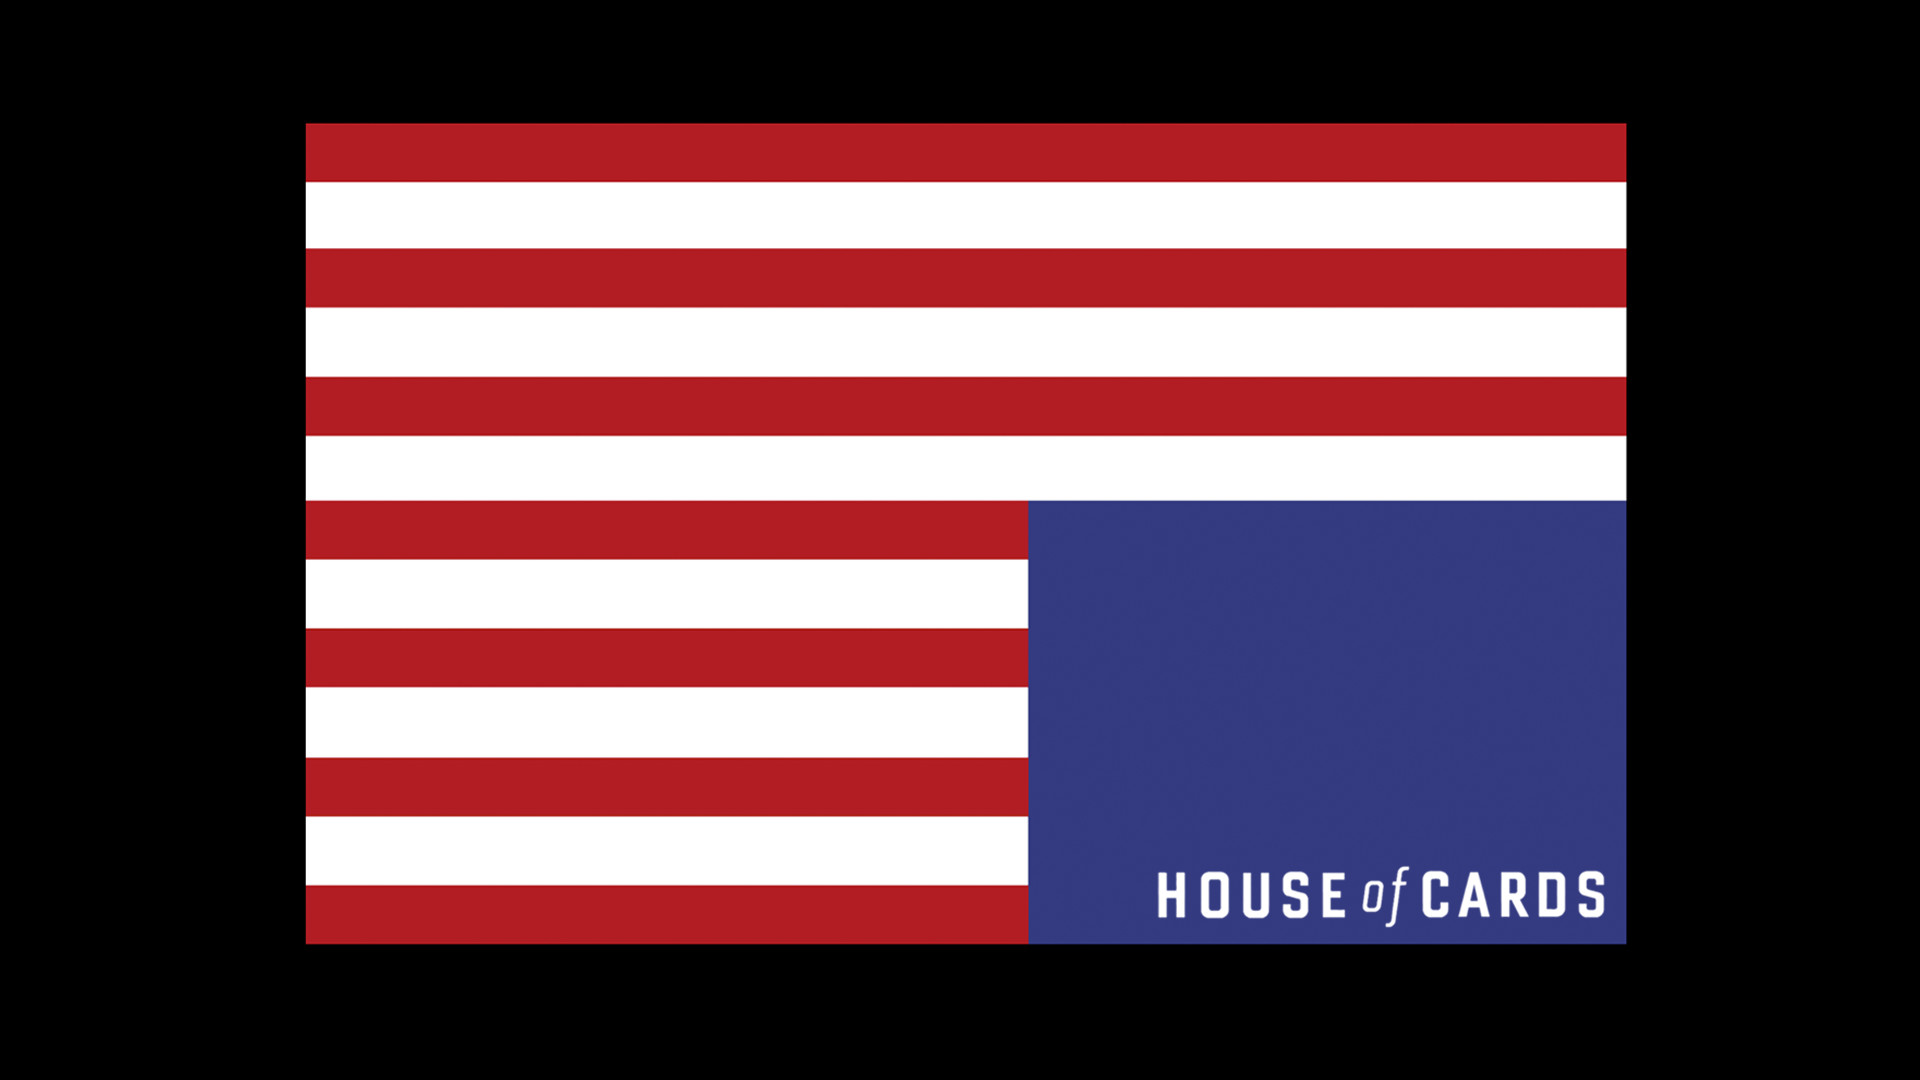 1920x1080 Minimalistic House of Cards Wallpaper ...